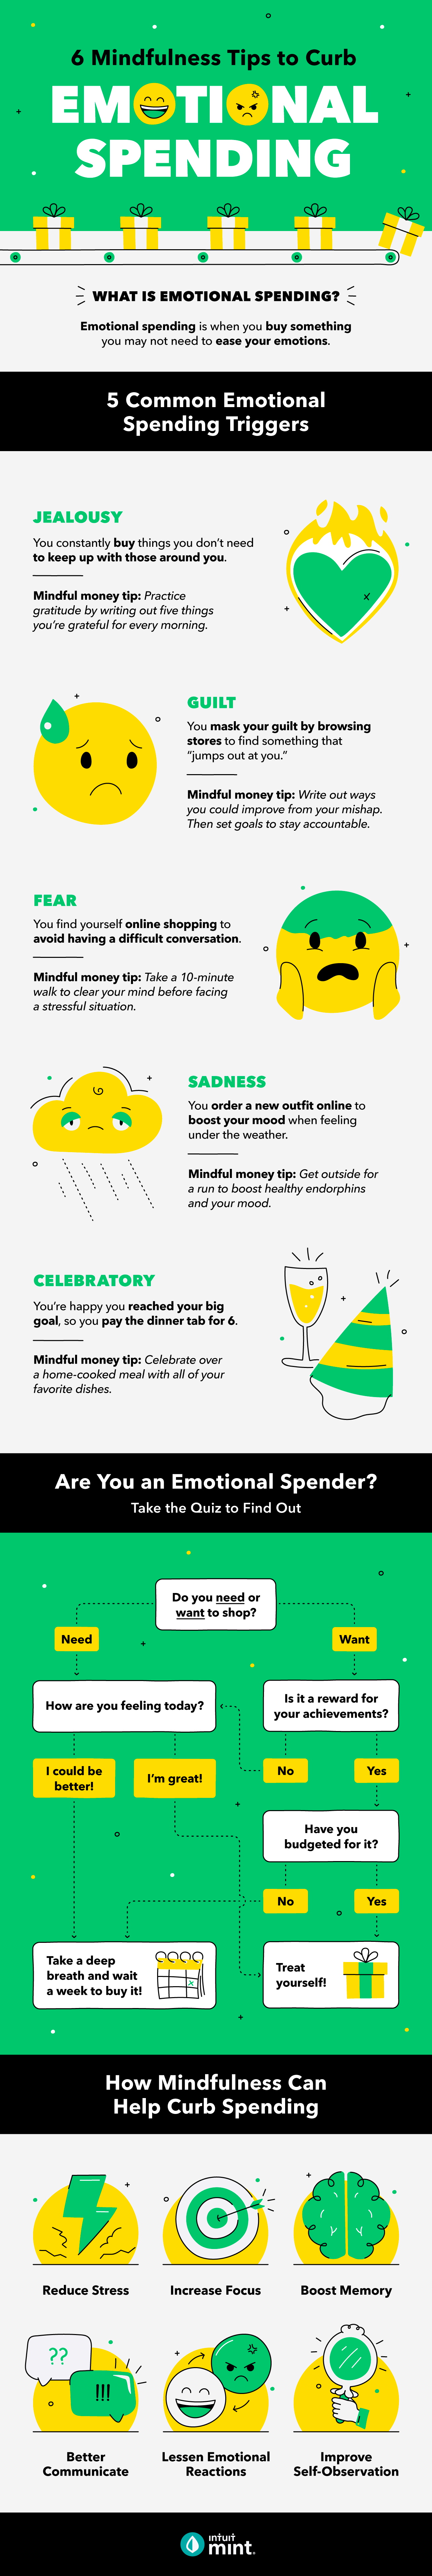 6 Mindfulness Tips to Curb Emotional Spending